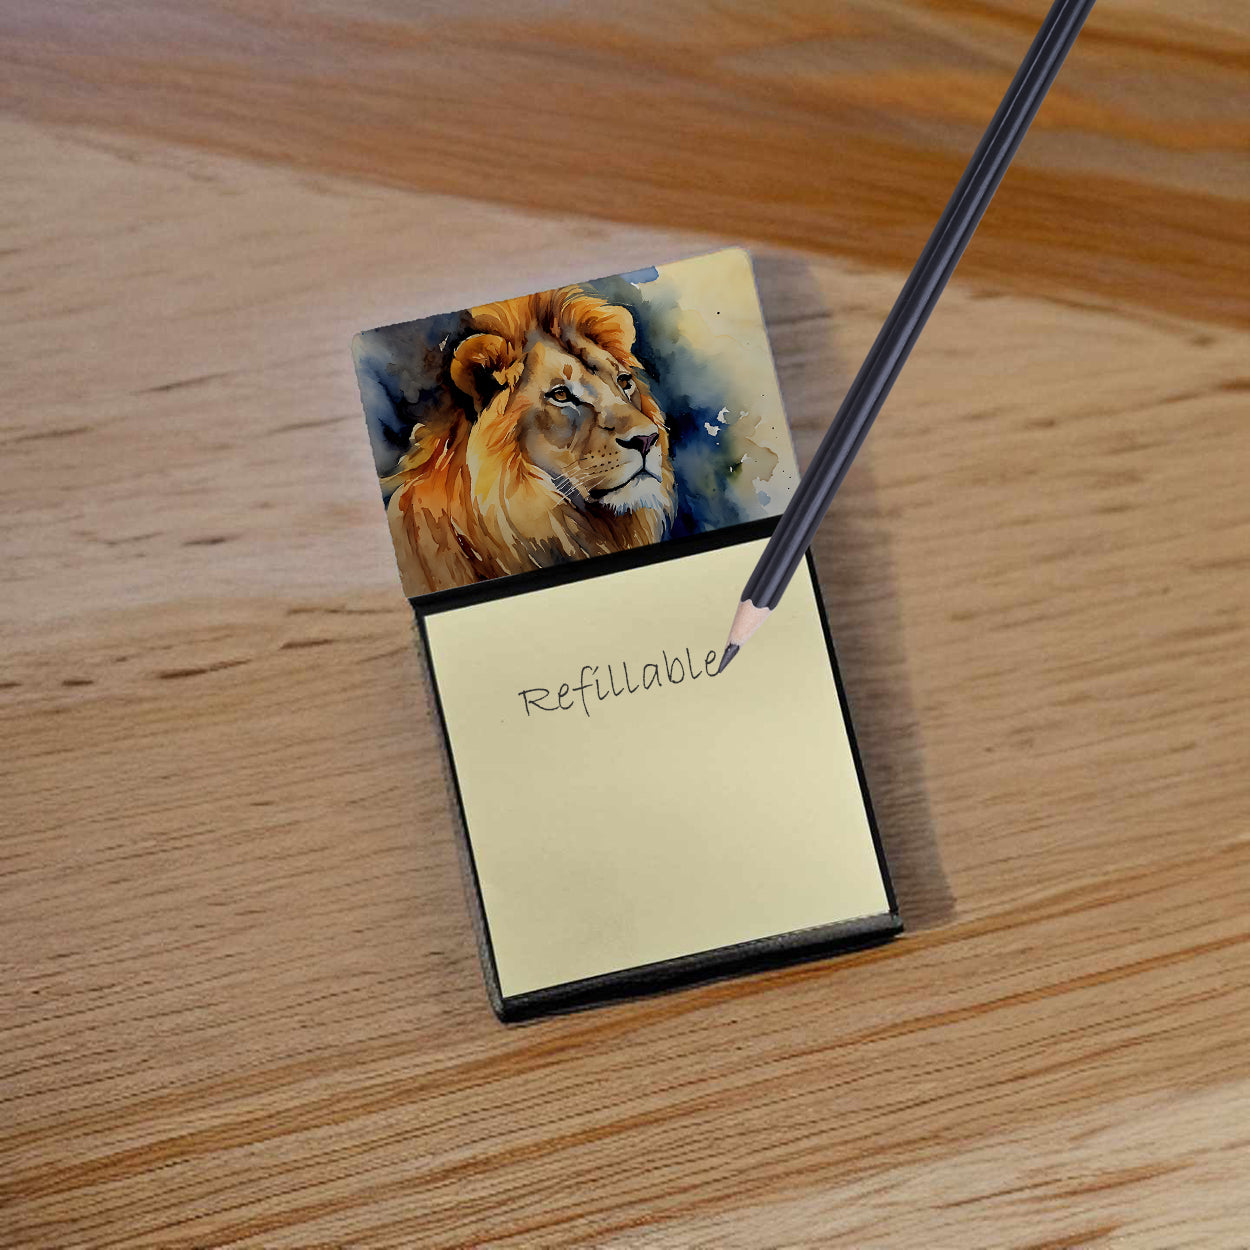 Buy this Lion Sticky Note Holder